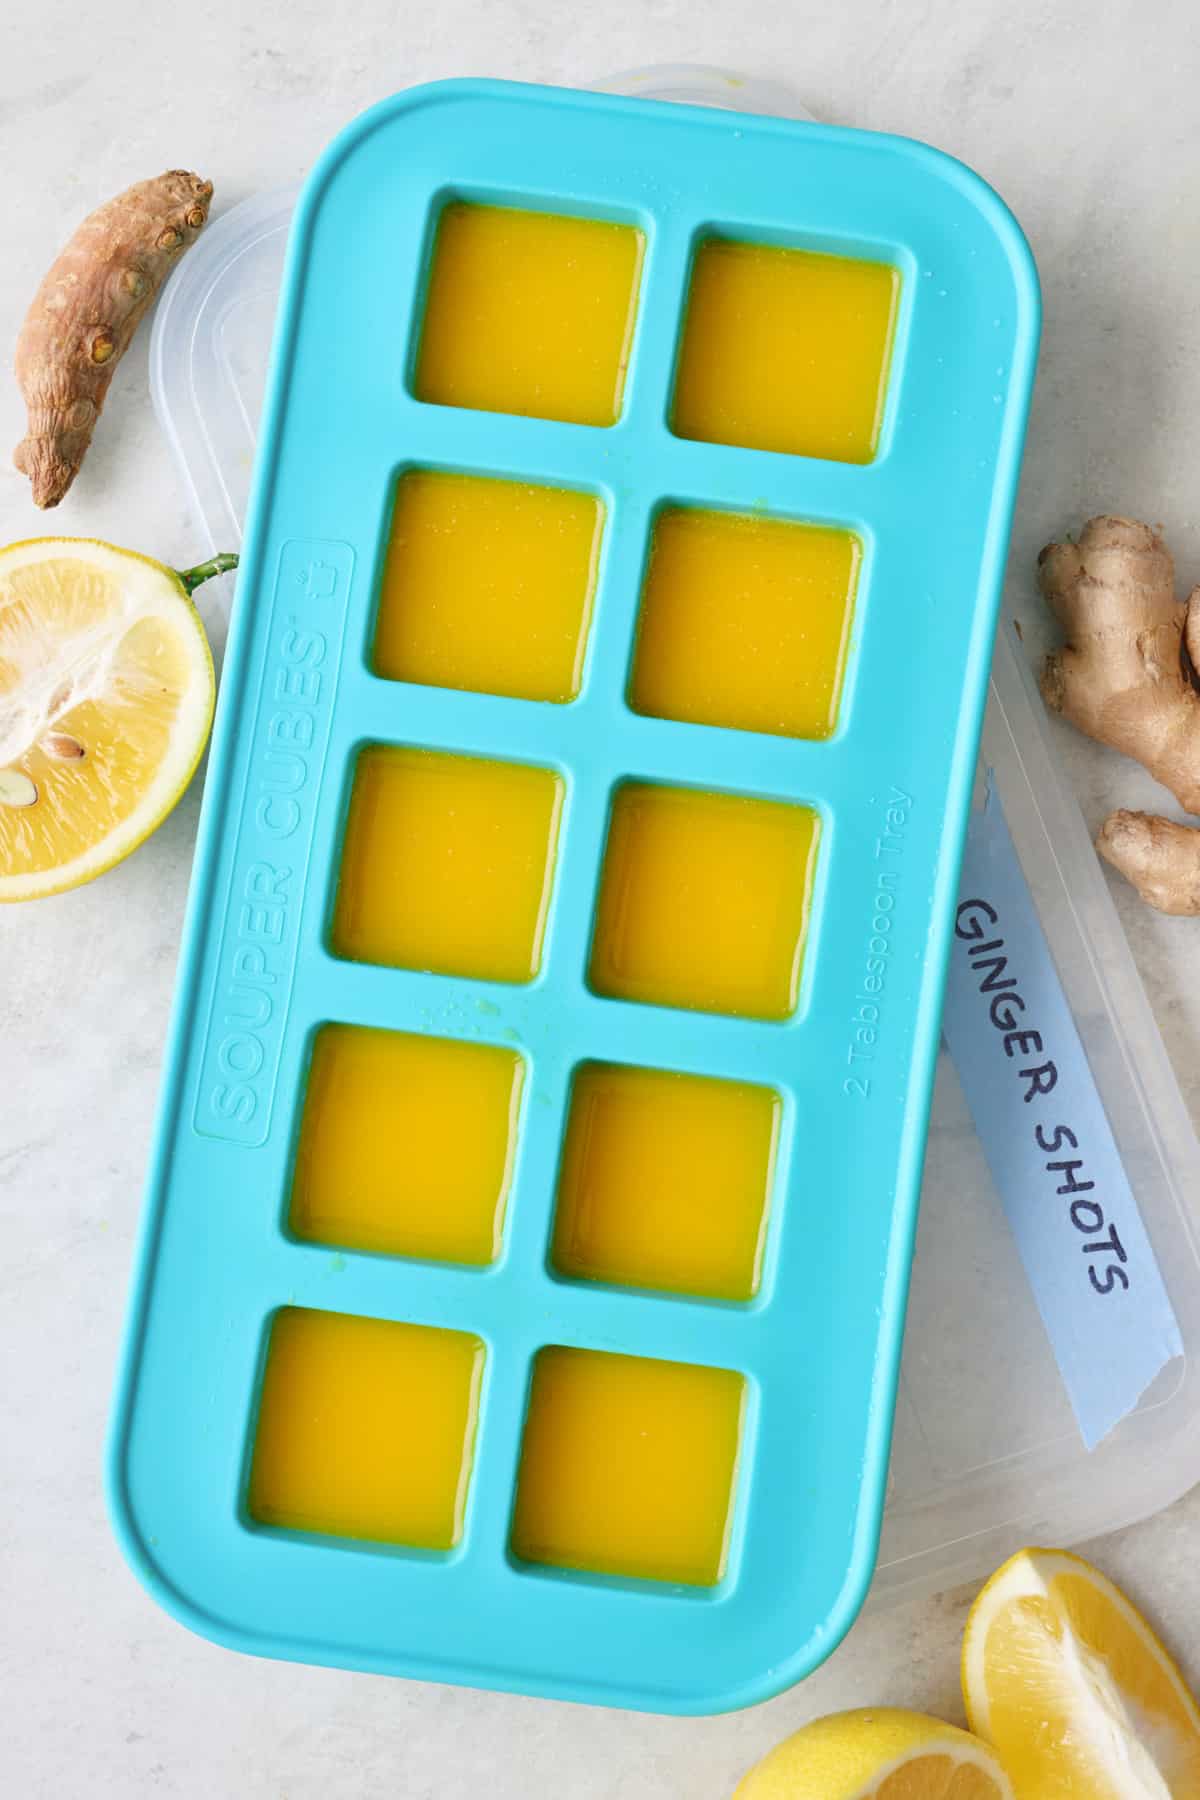 Ginger shots in an ice cube tray with lemons and ginger roots nearby.